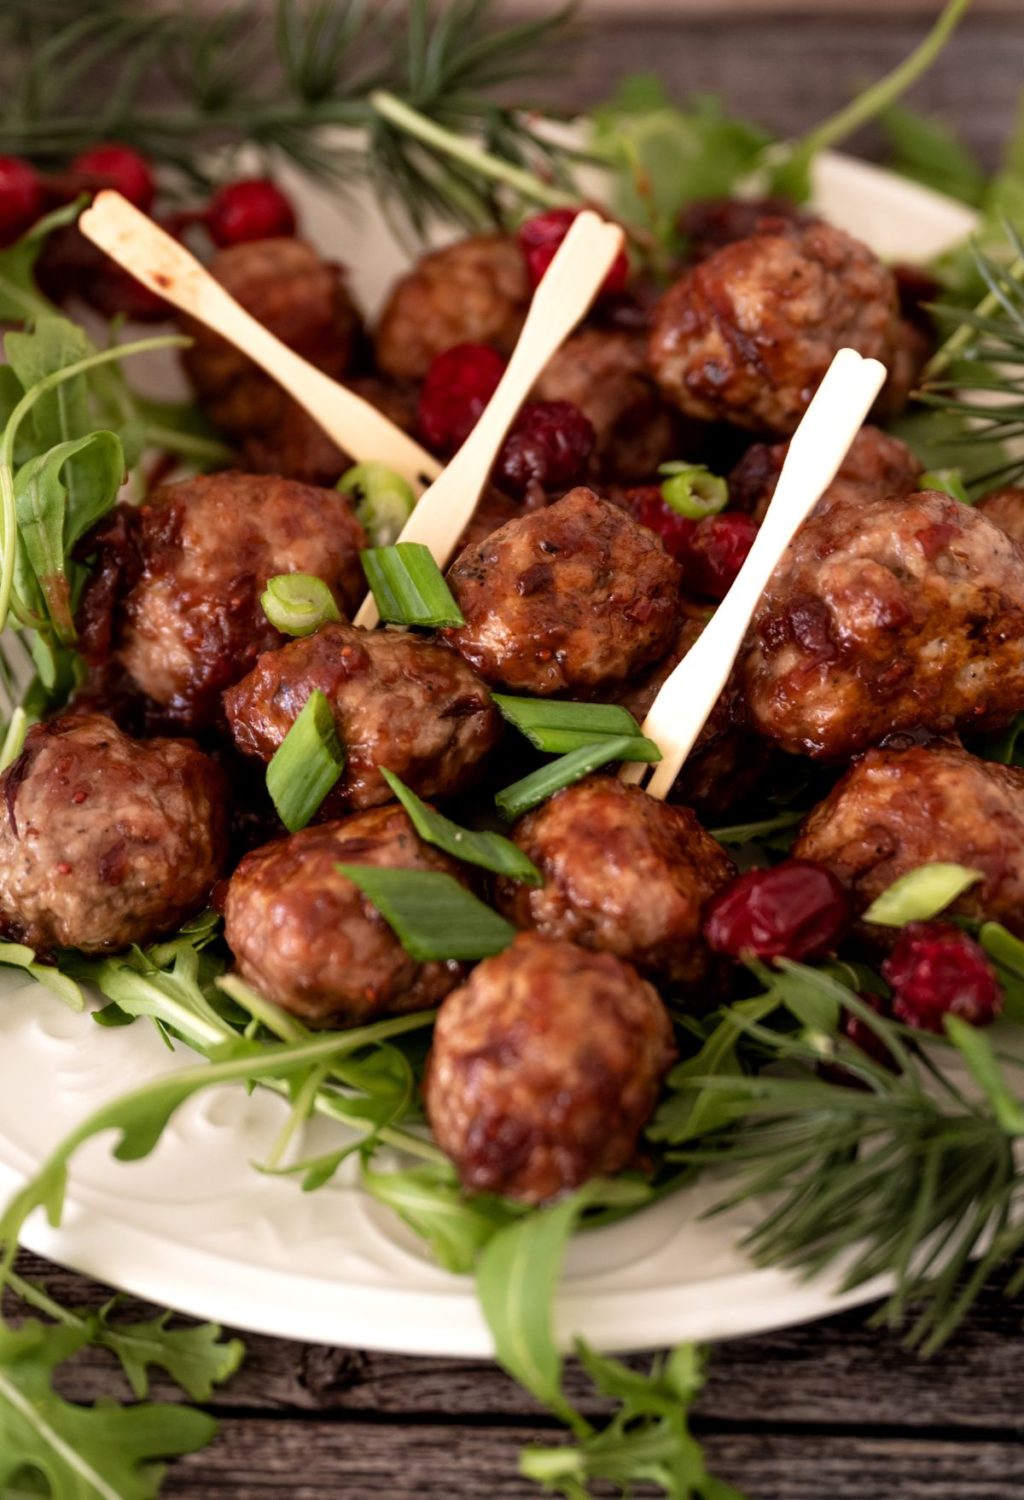 Meatballs with cranberries and greens on a plate.